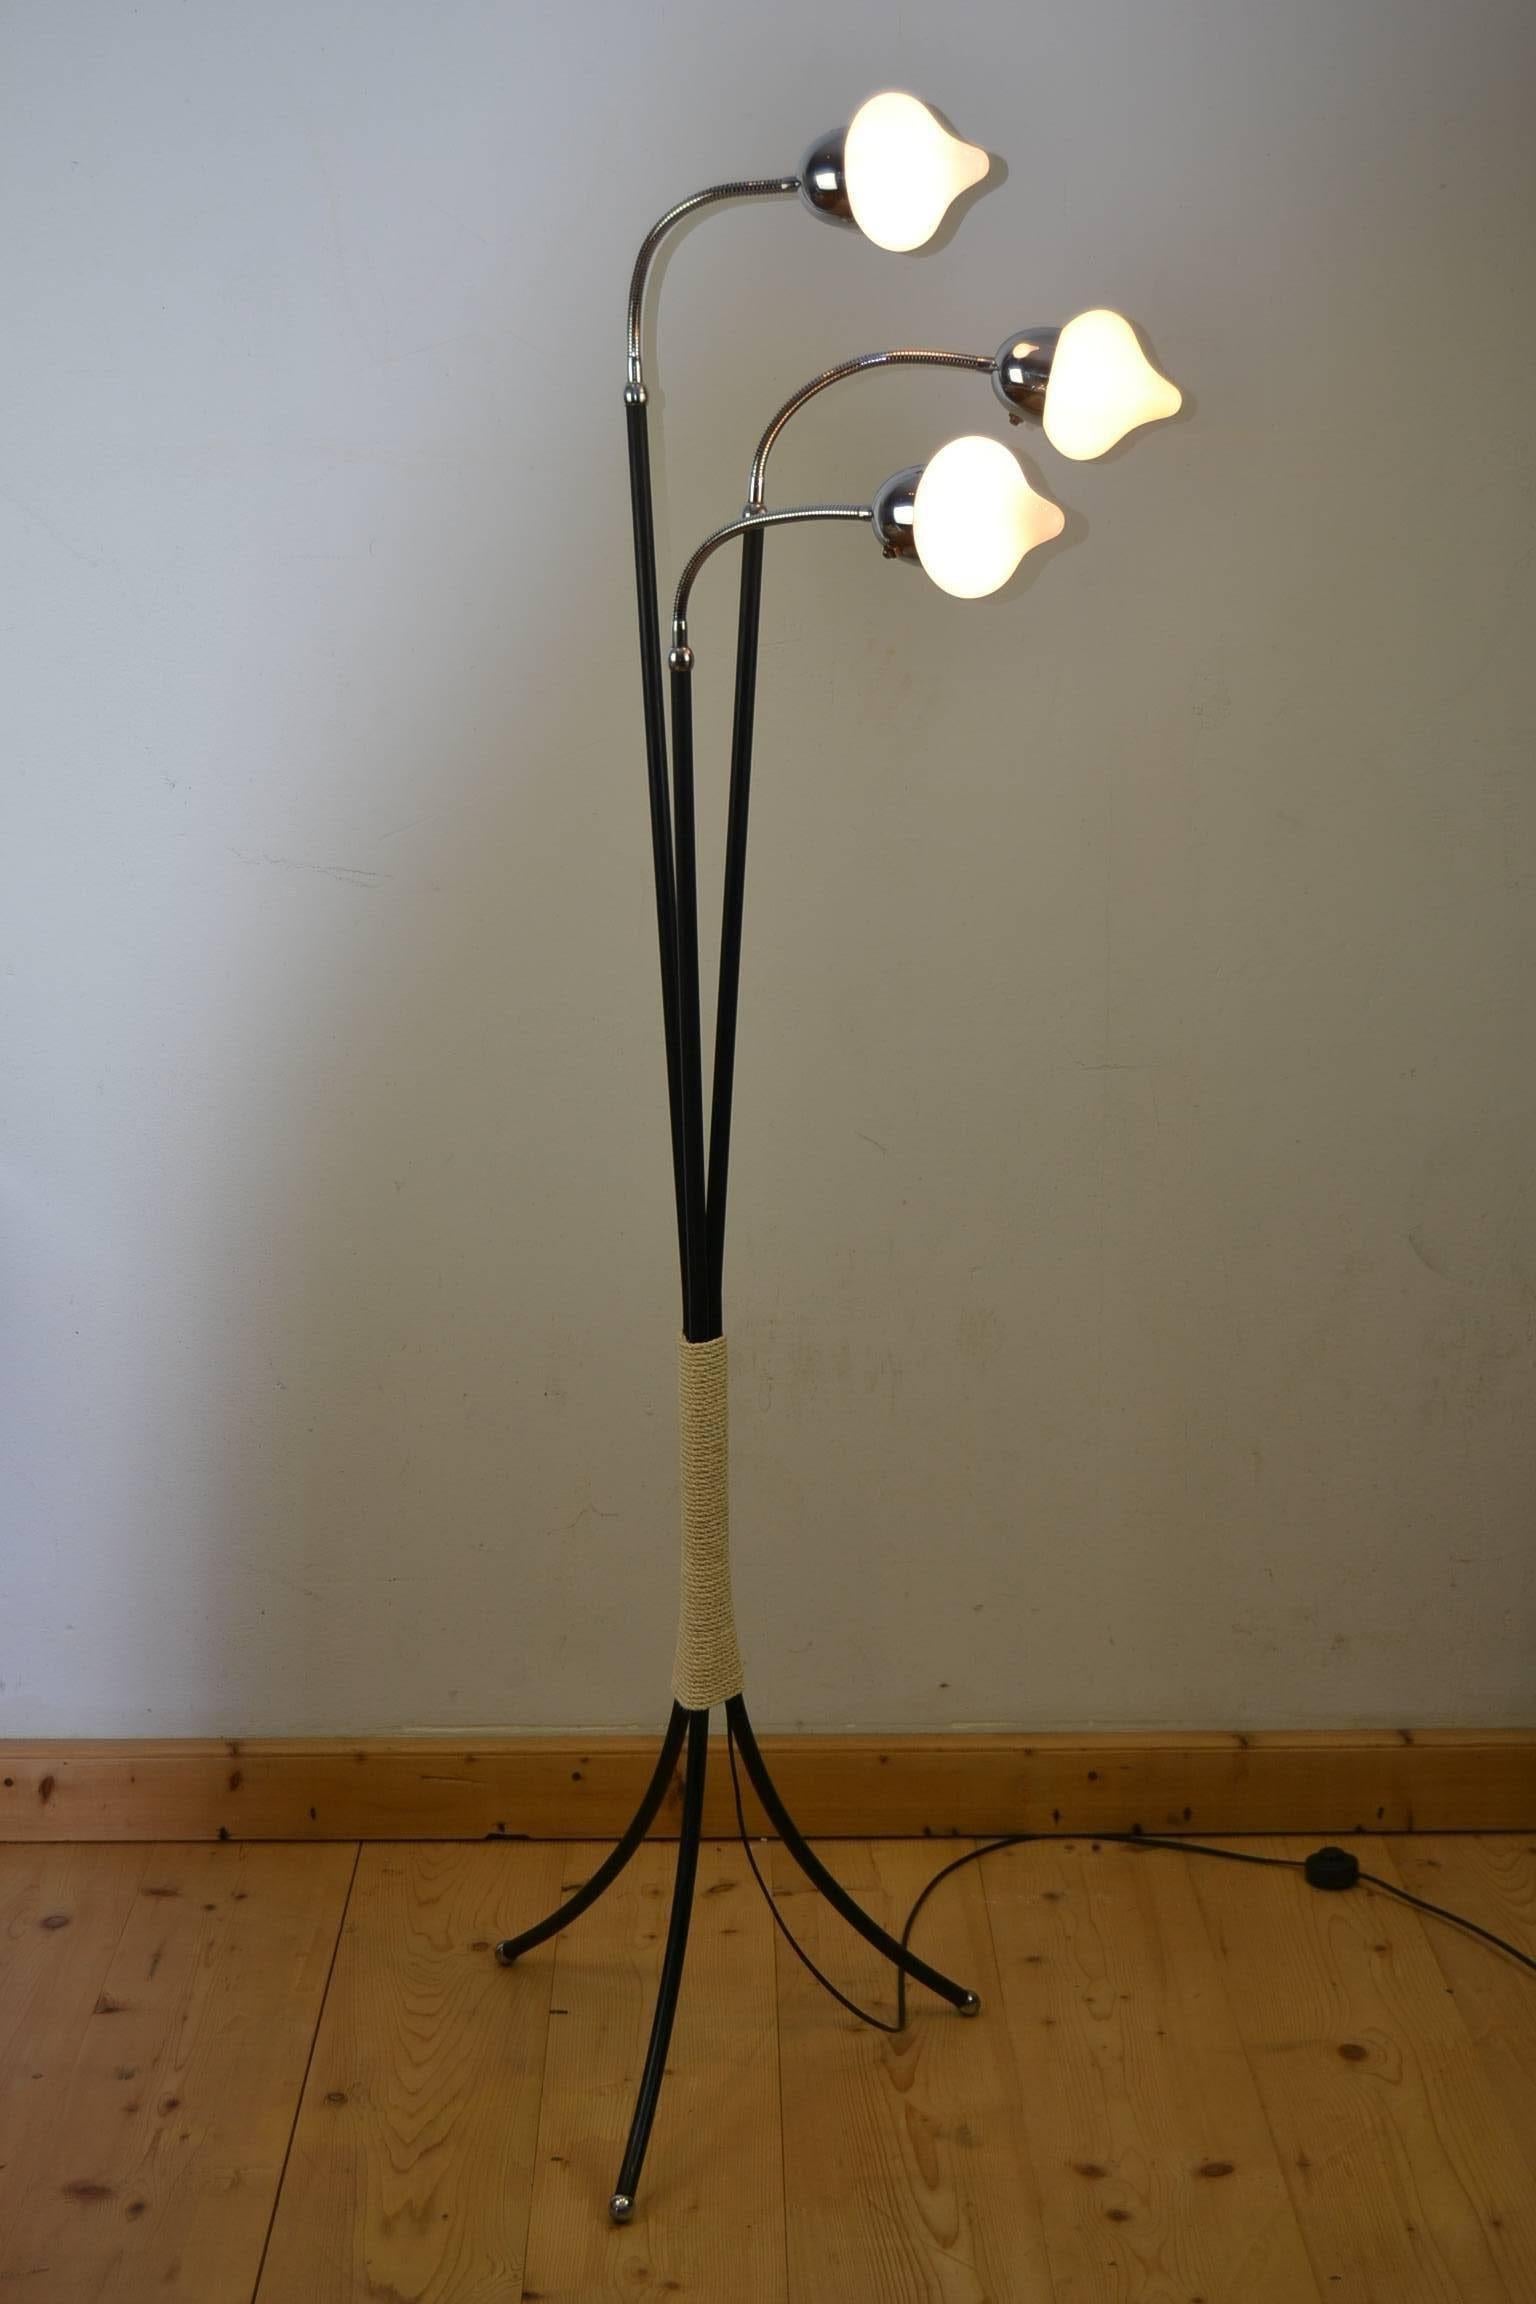 Vintage tripod modern floor light in the style of Stilnovo, Giuseppe Ostini, Reggiani.
1960s Scandinavian three-light lamp on tripod iron raffia wrapped base with chromed flexible arms and white glass shades. The arms can be oriented in any